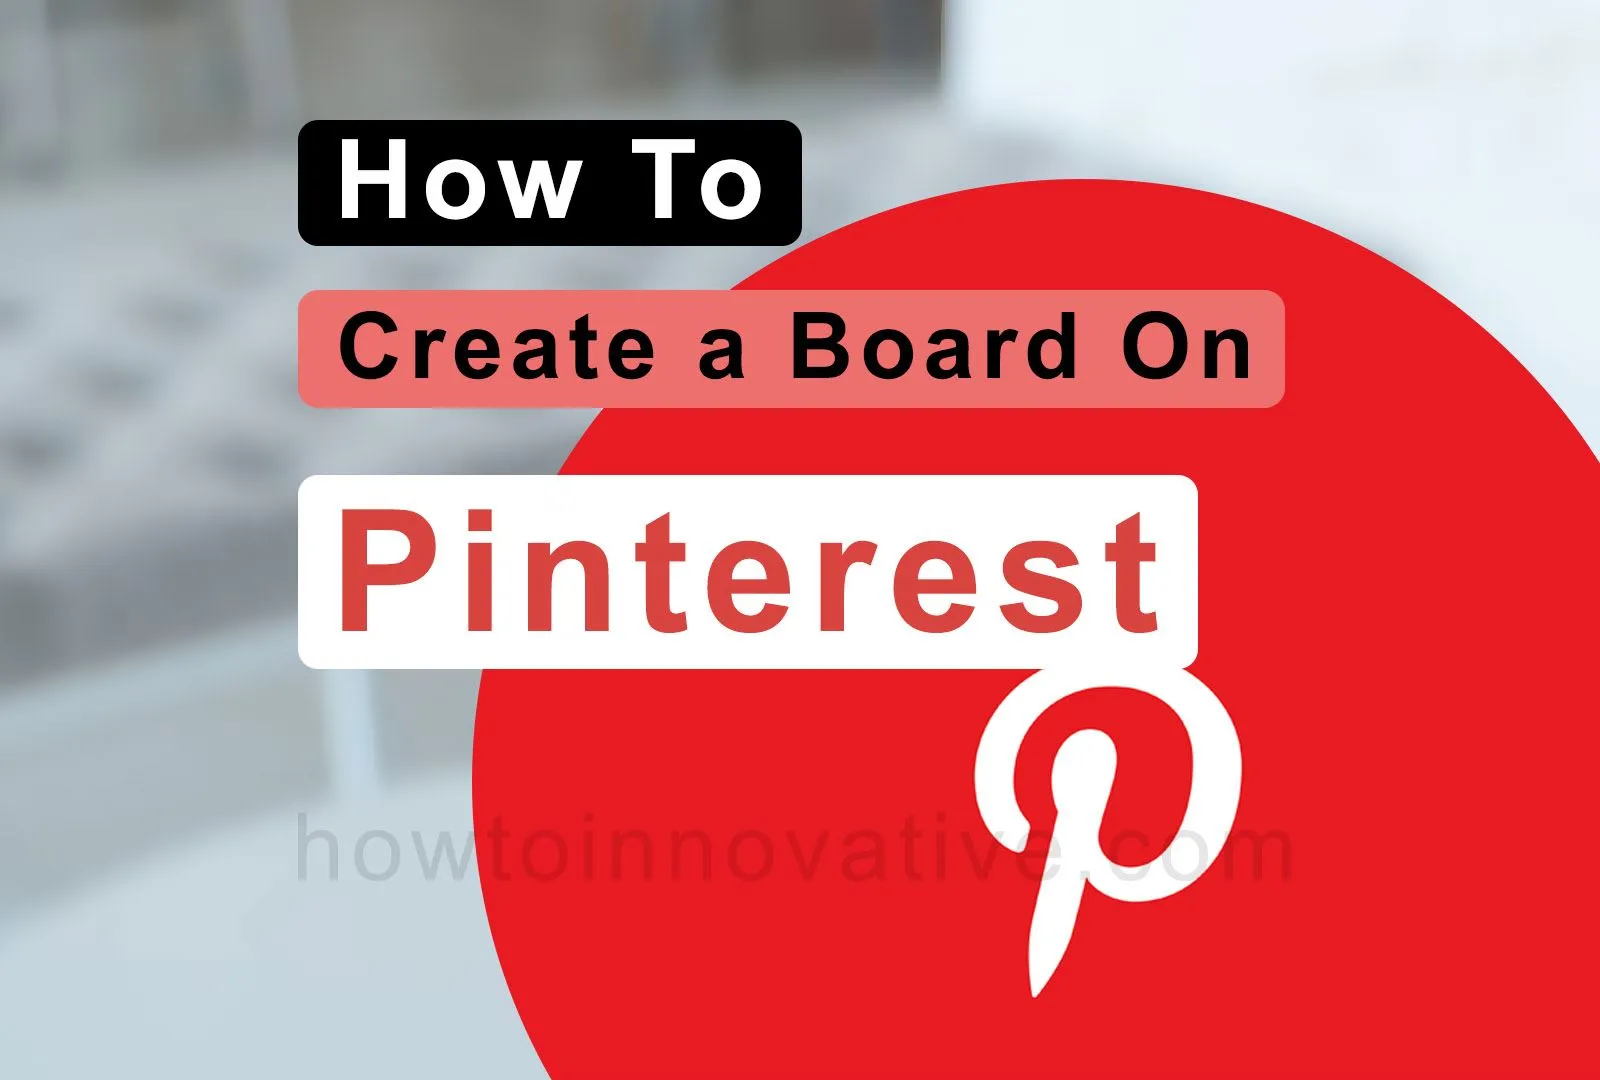 How To Create a Board On Pinterest